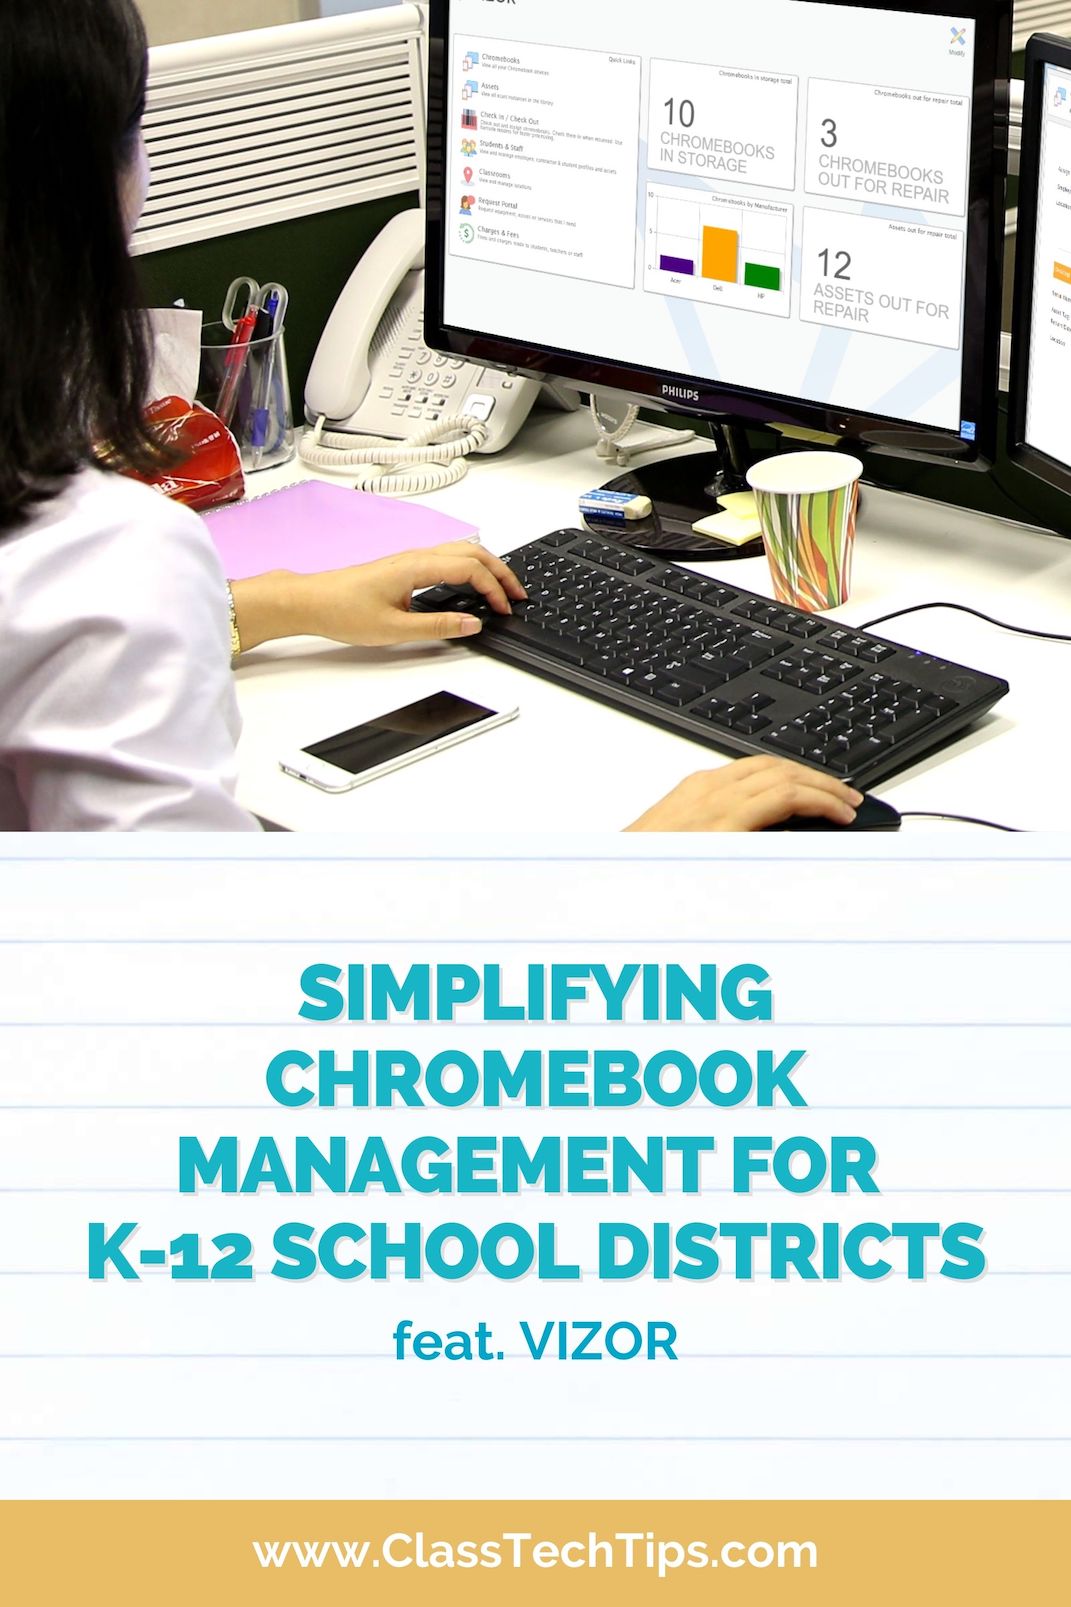 Chromebooks are massively popular in U.S. schools, but Chromebook management can be a challenge. Learn how VIZOR supports device management.